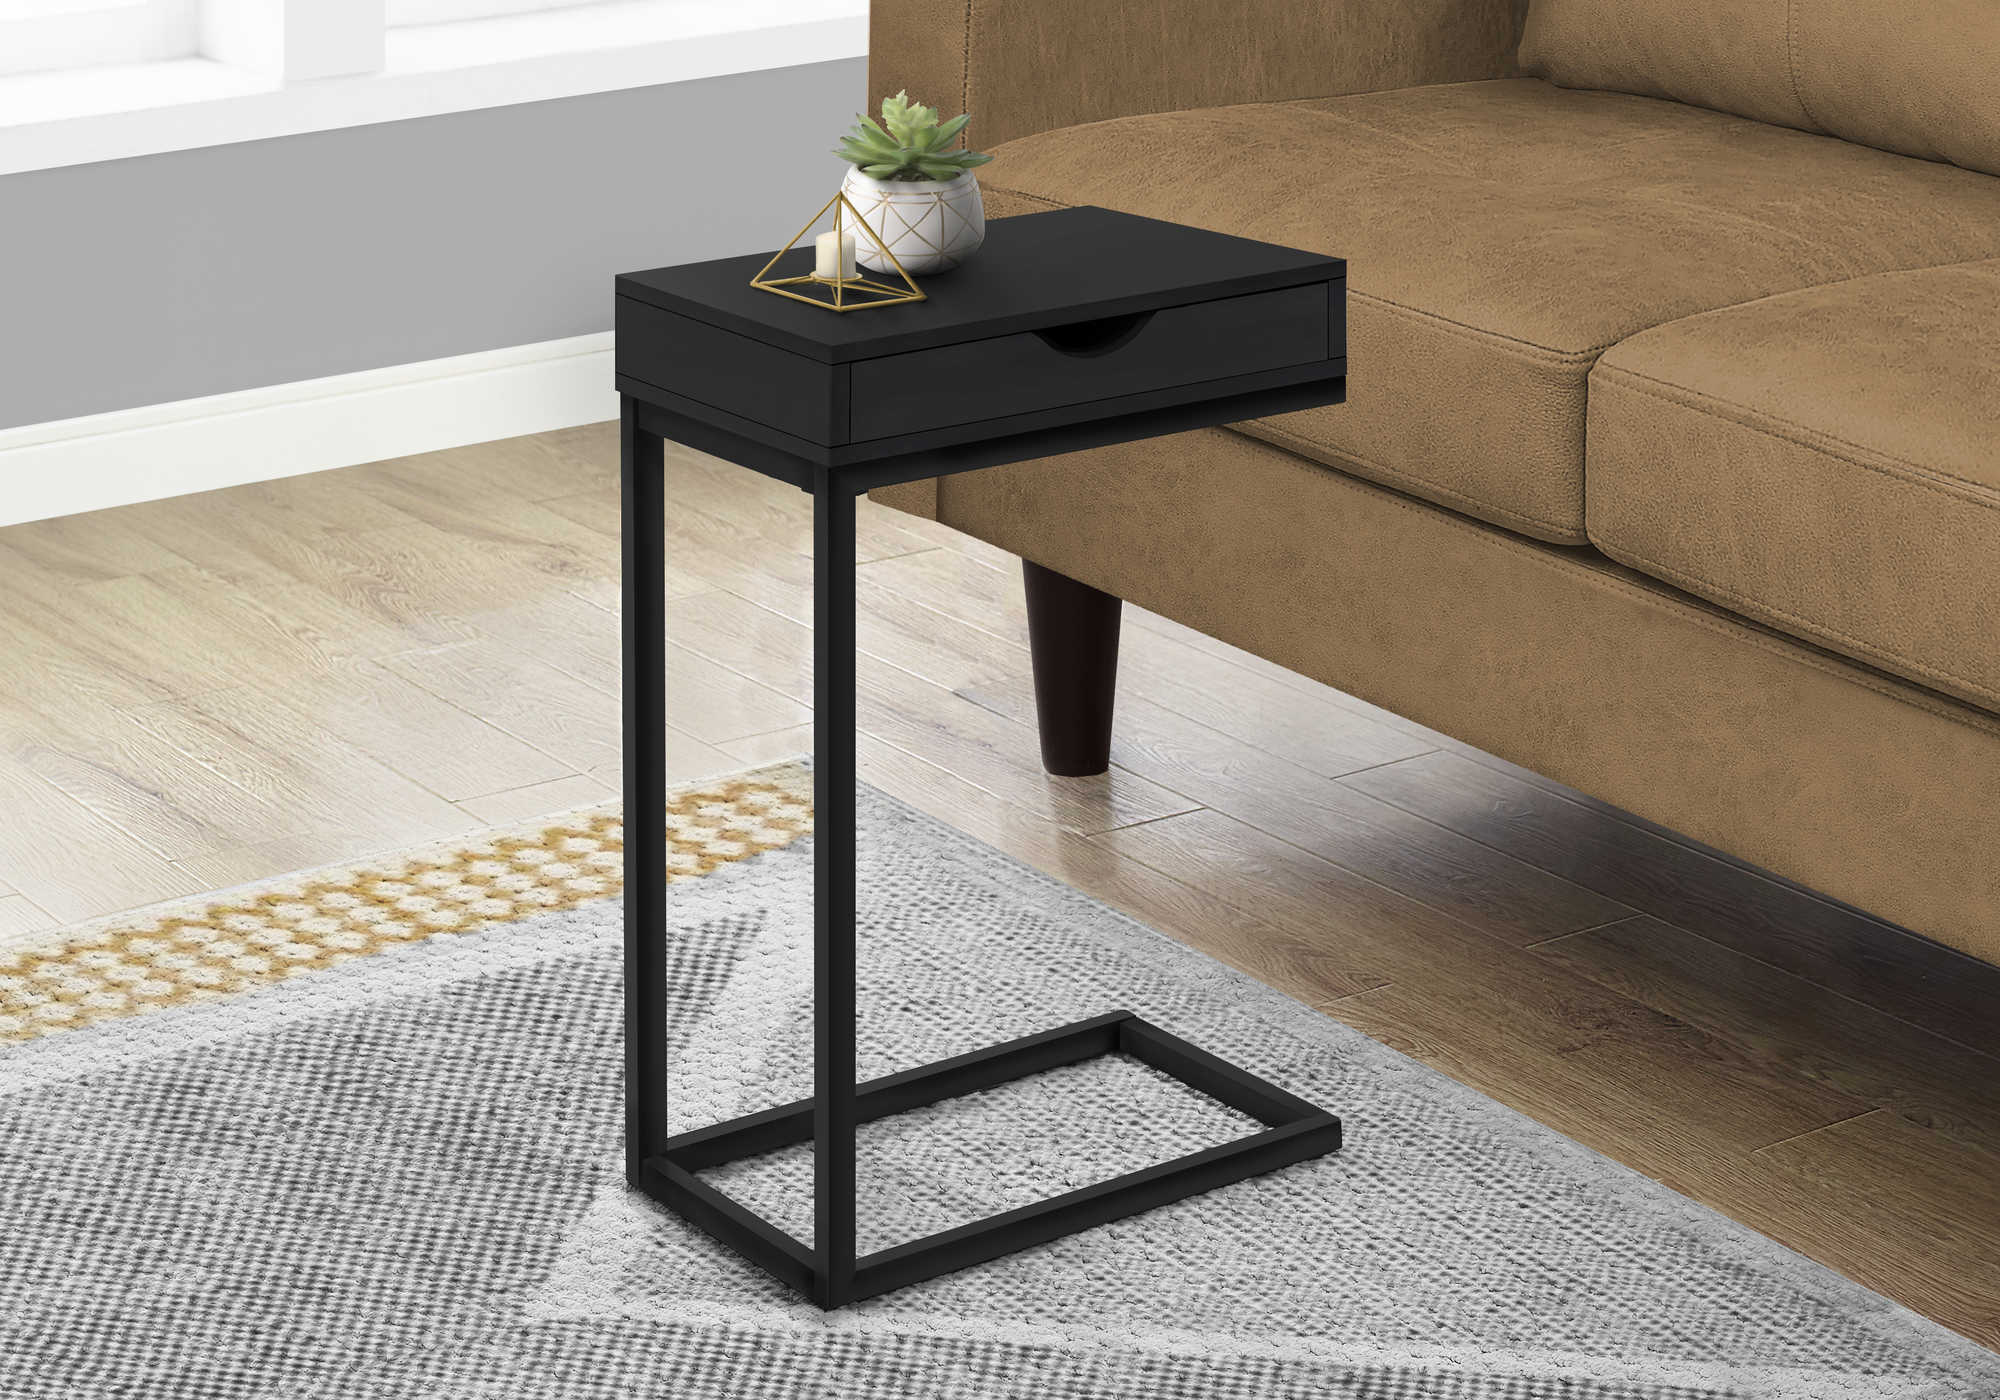 ACCENT TABLE - BLACK / BLACK METAL WITH A DRAWER